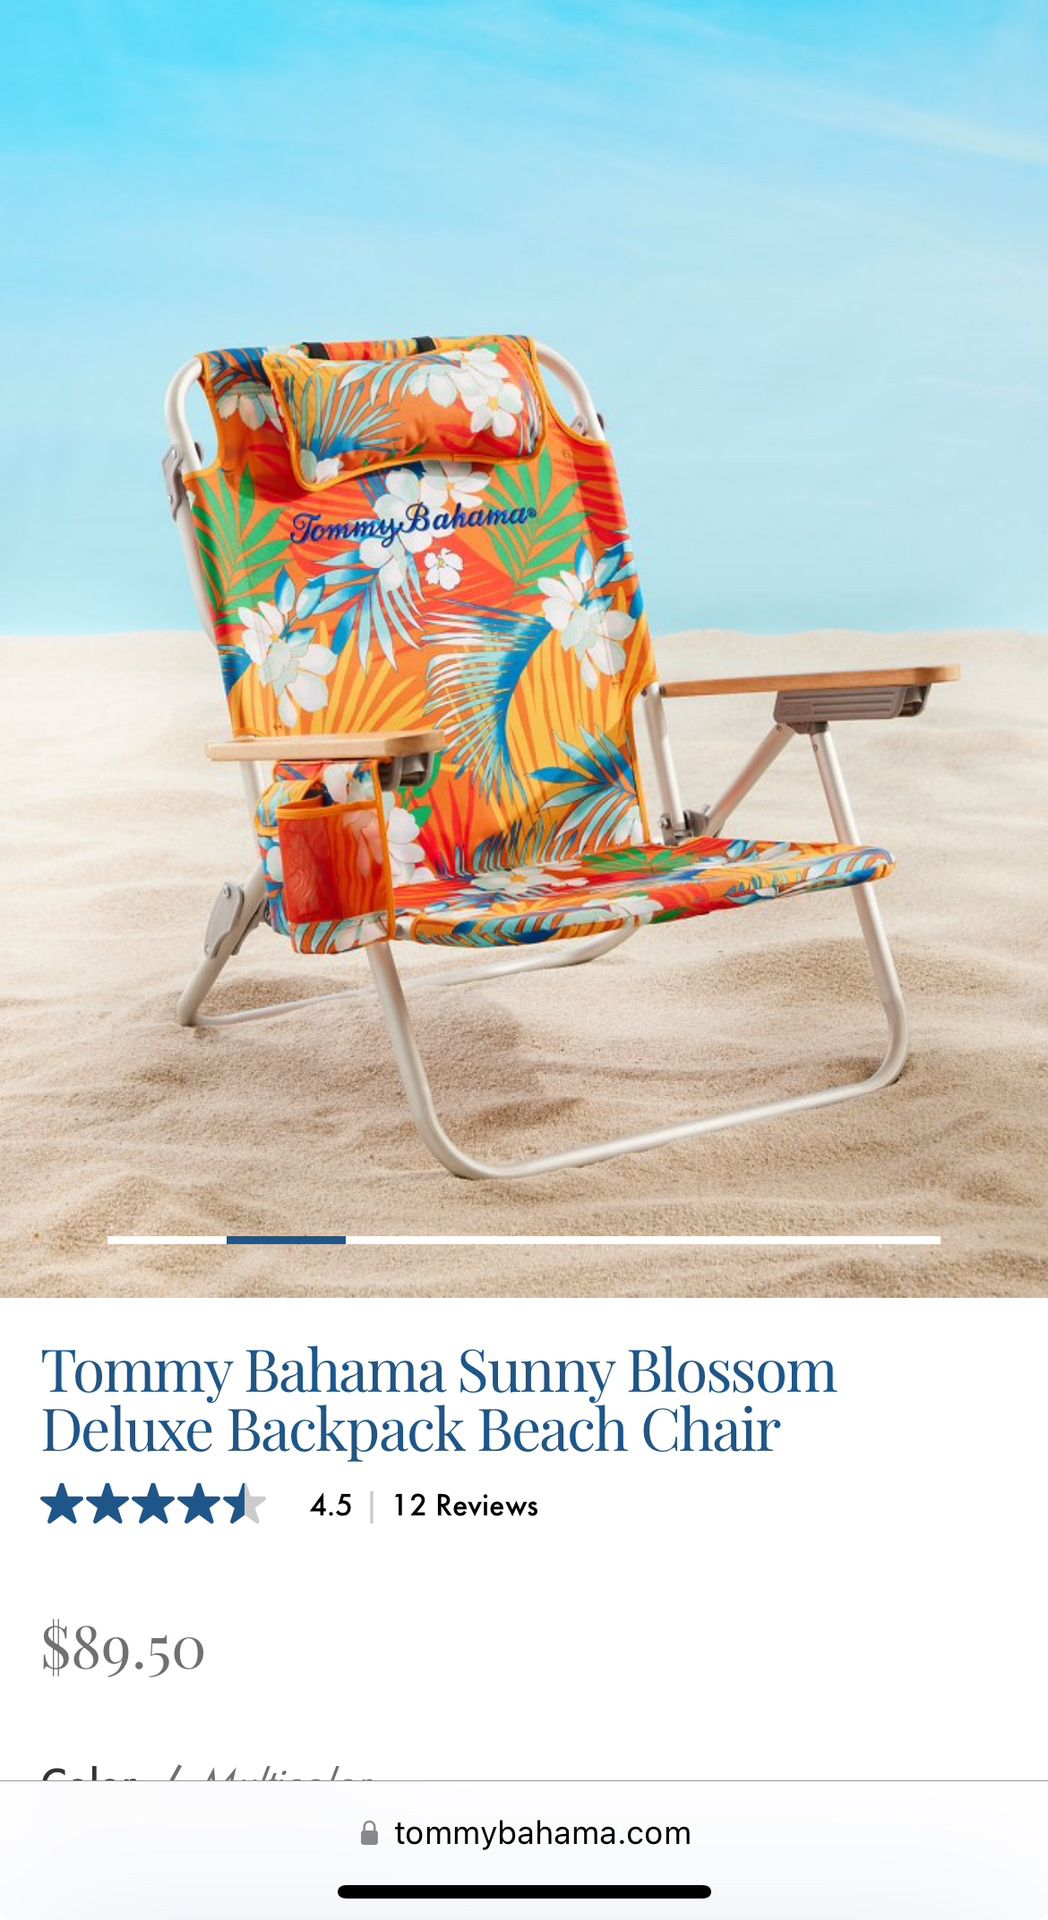 NEW- Beach Chair  Backpack  With Cooler